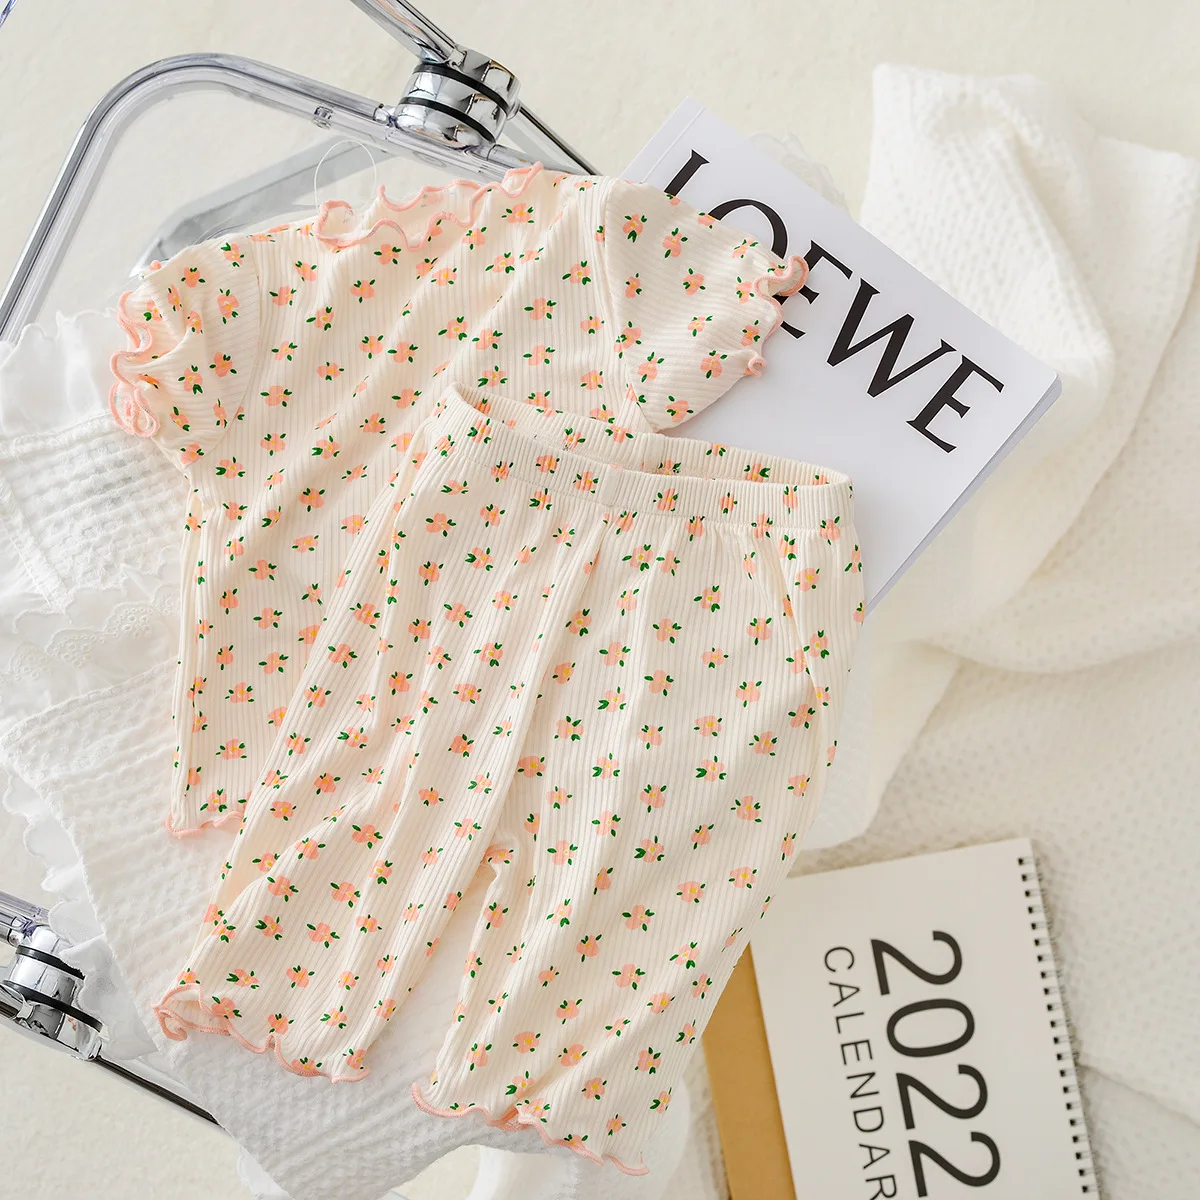 2022 Summer Baby Girls Clothes Set Kids Bear Strawberry Home Clothes Tops+shorts 2pcs Suit Children's Korean Clothing Suits baby girl cotton clothing set